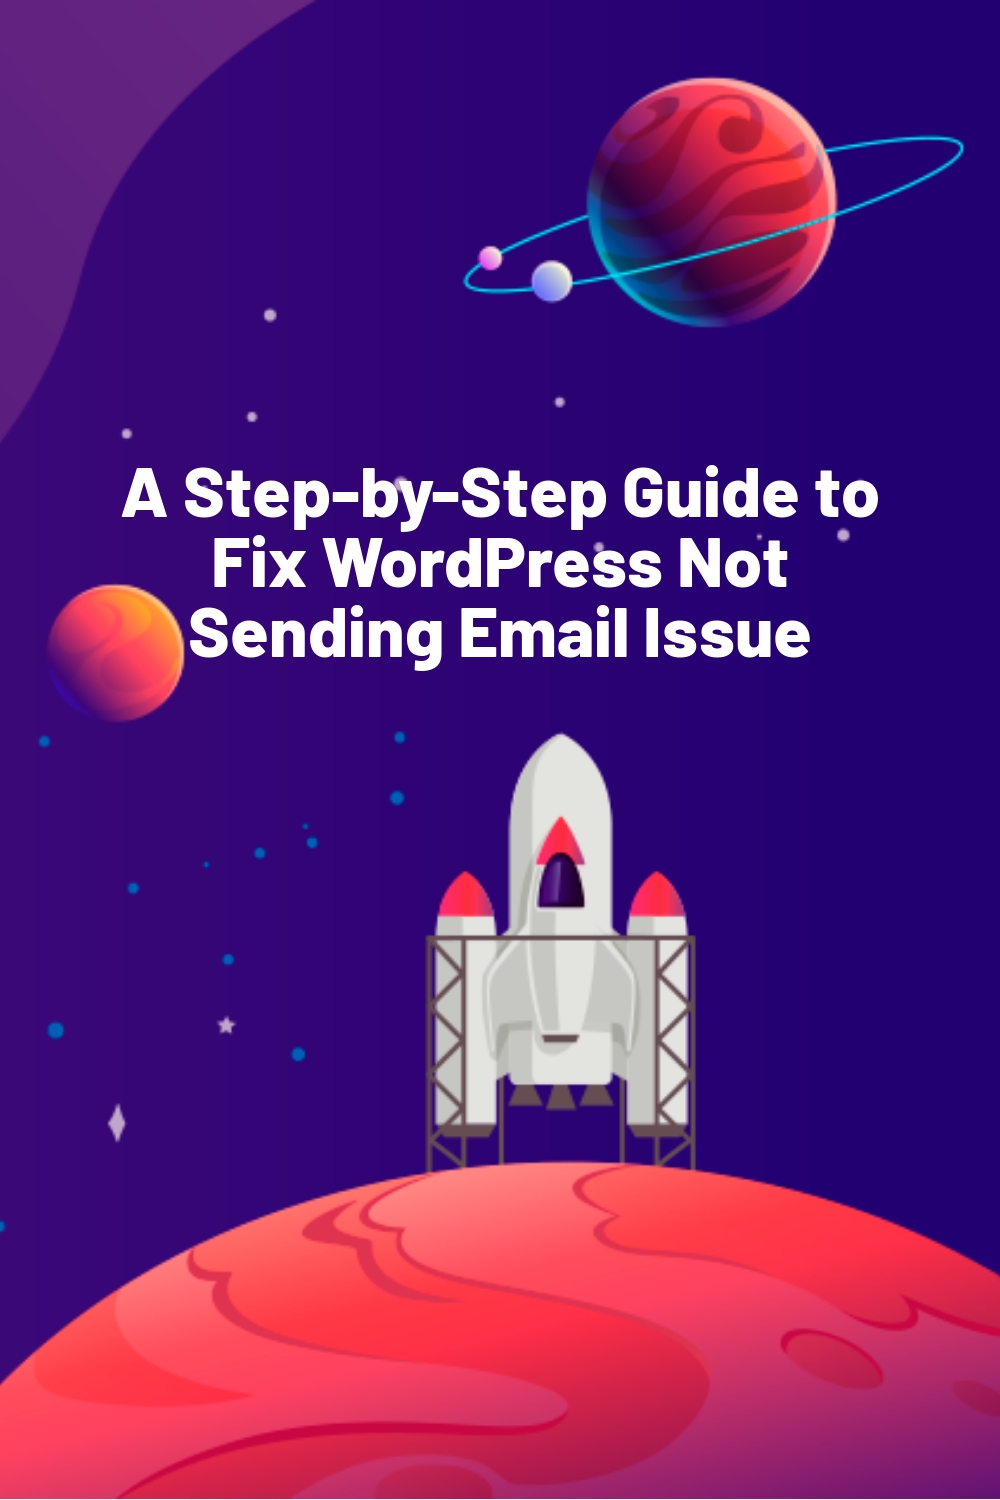 A Step-by-Step Guide to Fix WordPress Not Sending Email Issue